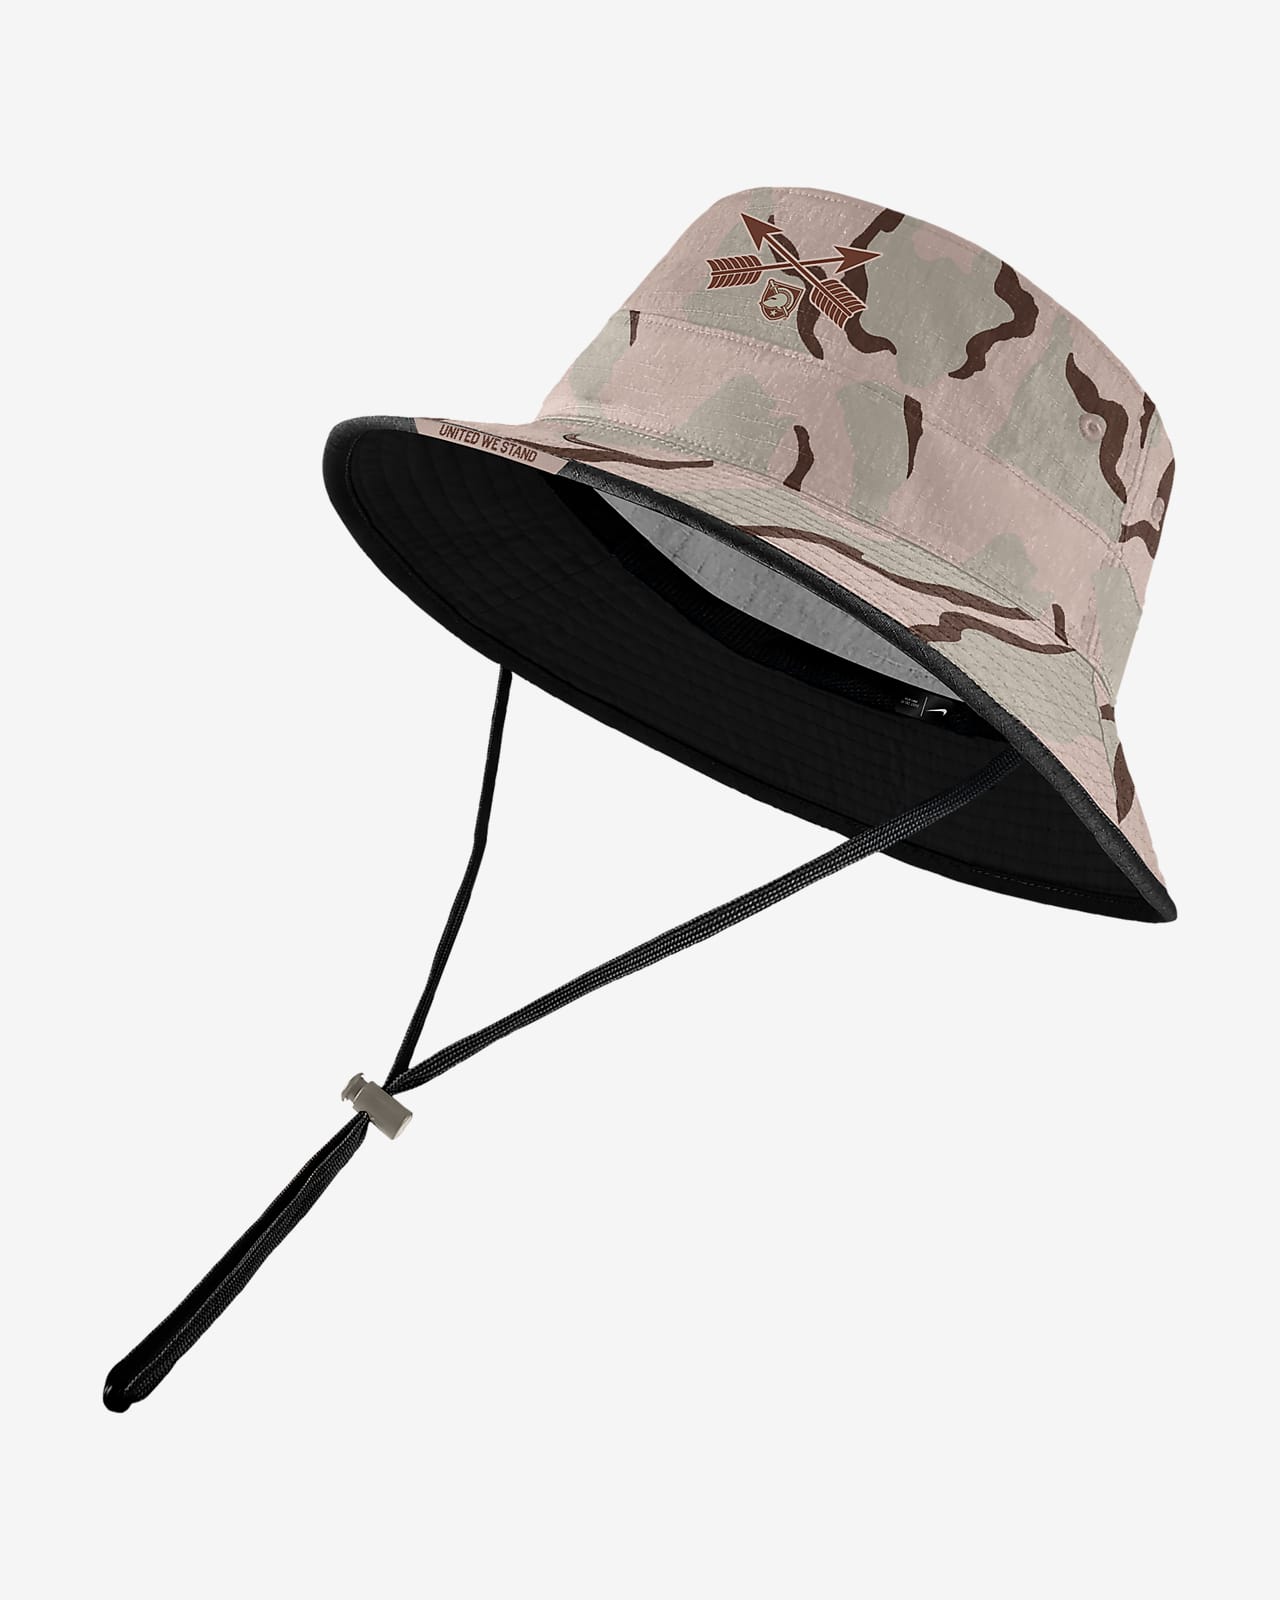 GetUSCart- Sun Hat Bucket-Boys-Camouflage Hats Fishman Cap Packable for  7-14 Years Old (Camo-1, 56cm Suggested for 7-14years Old Kids)